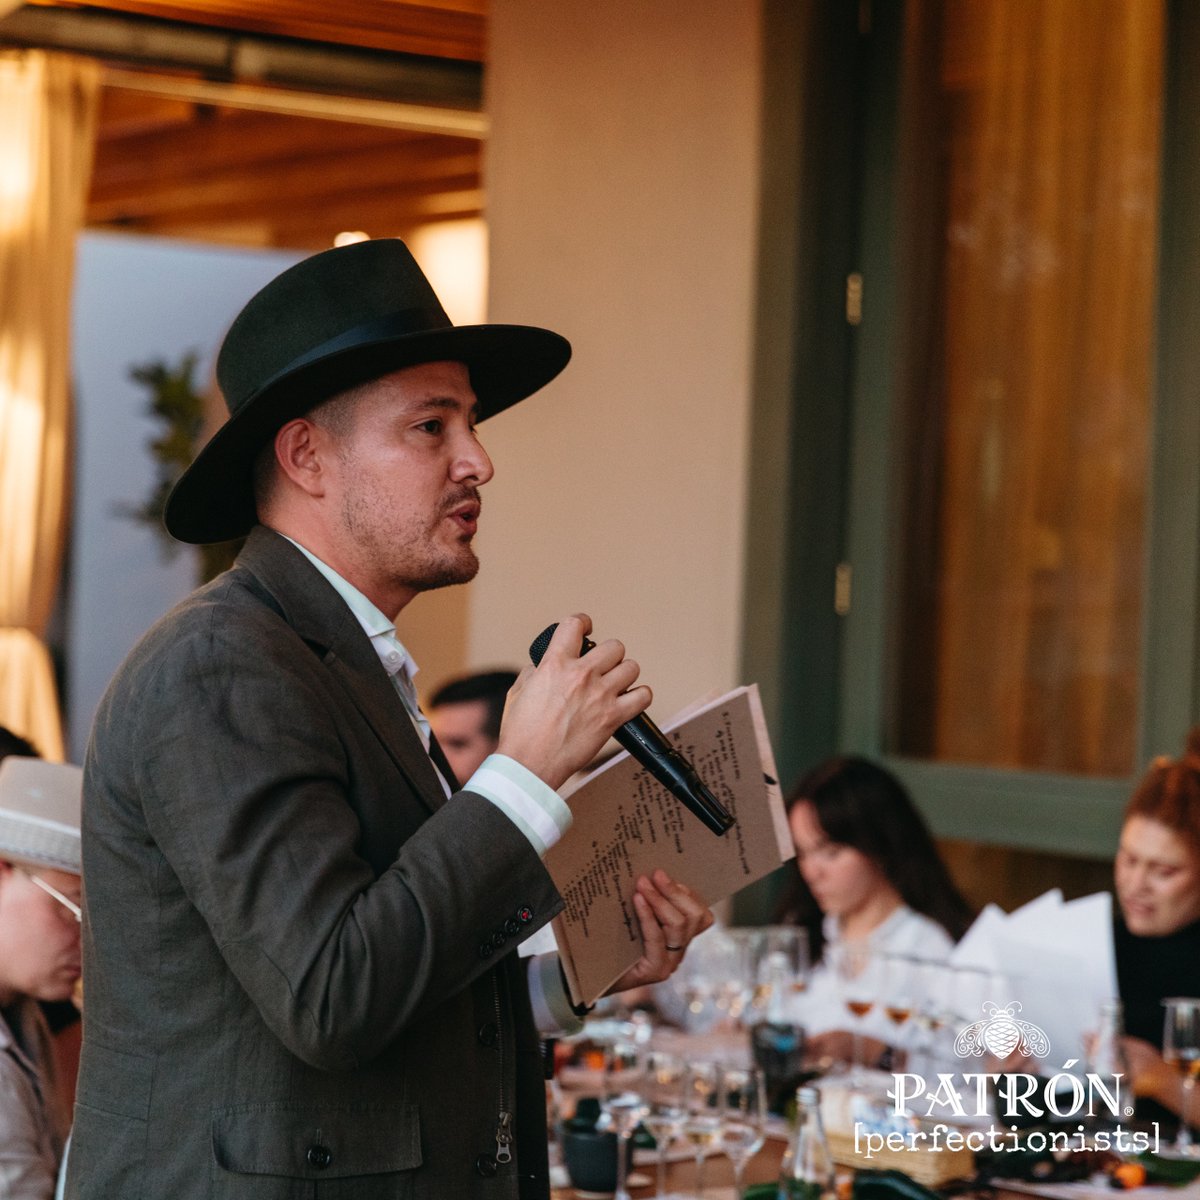 The first day at Hacienda Patrón found our #patronperfectionists global finalists fully immersed in education. #patrontequila #mixologiademexico #ourhands #bartending